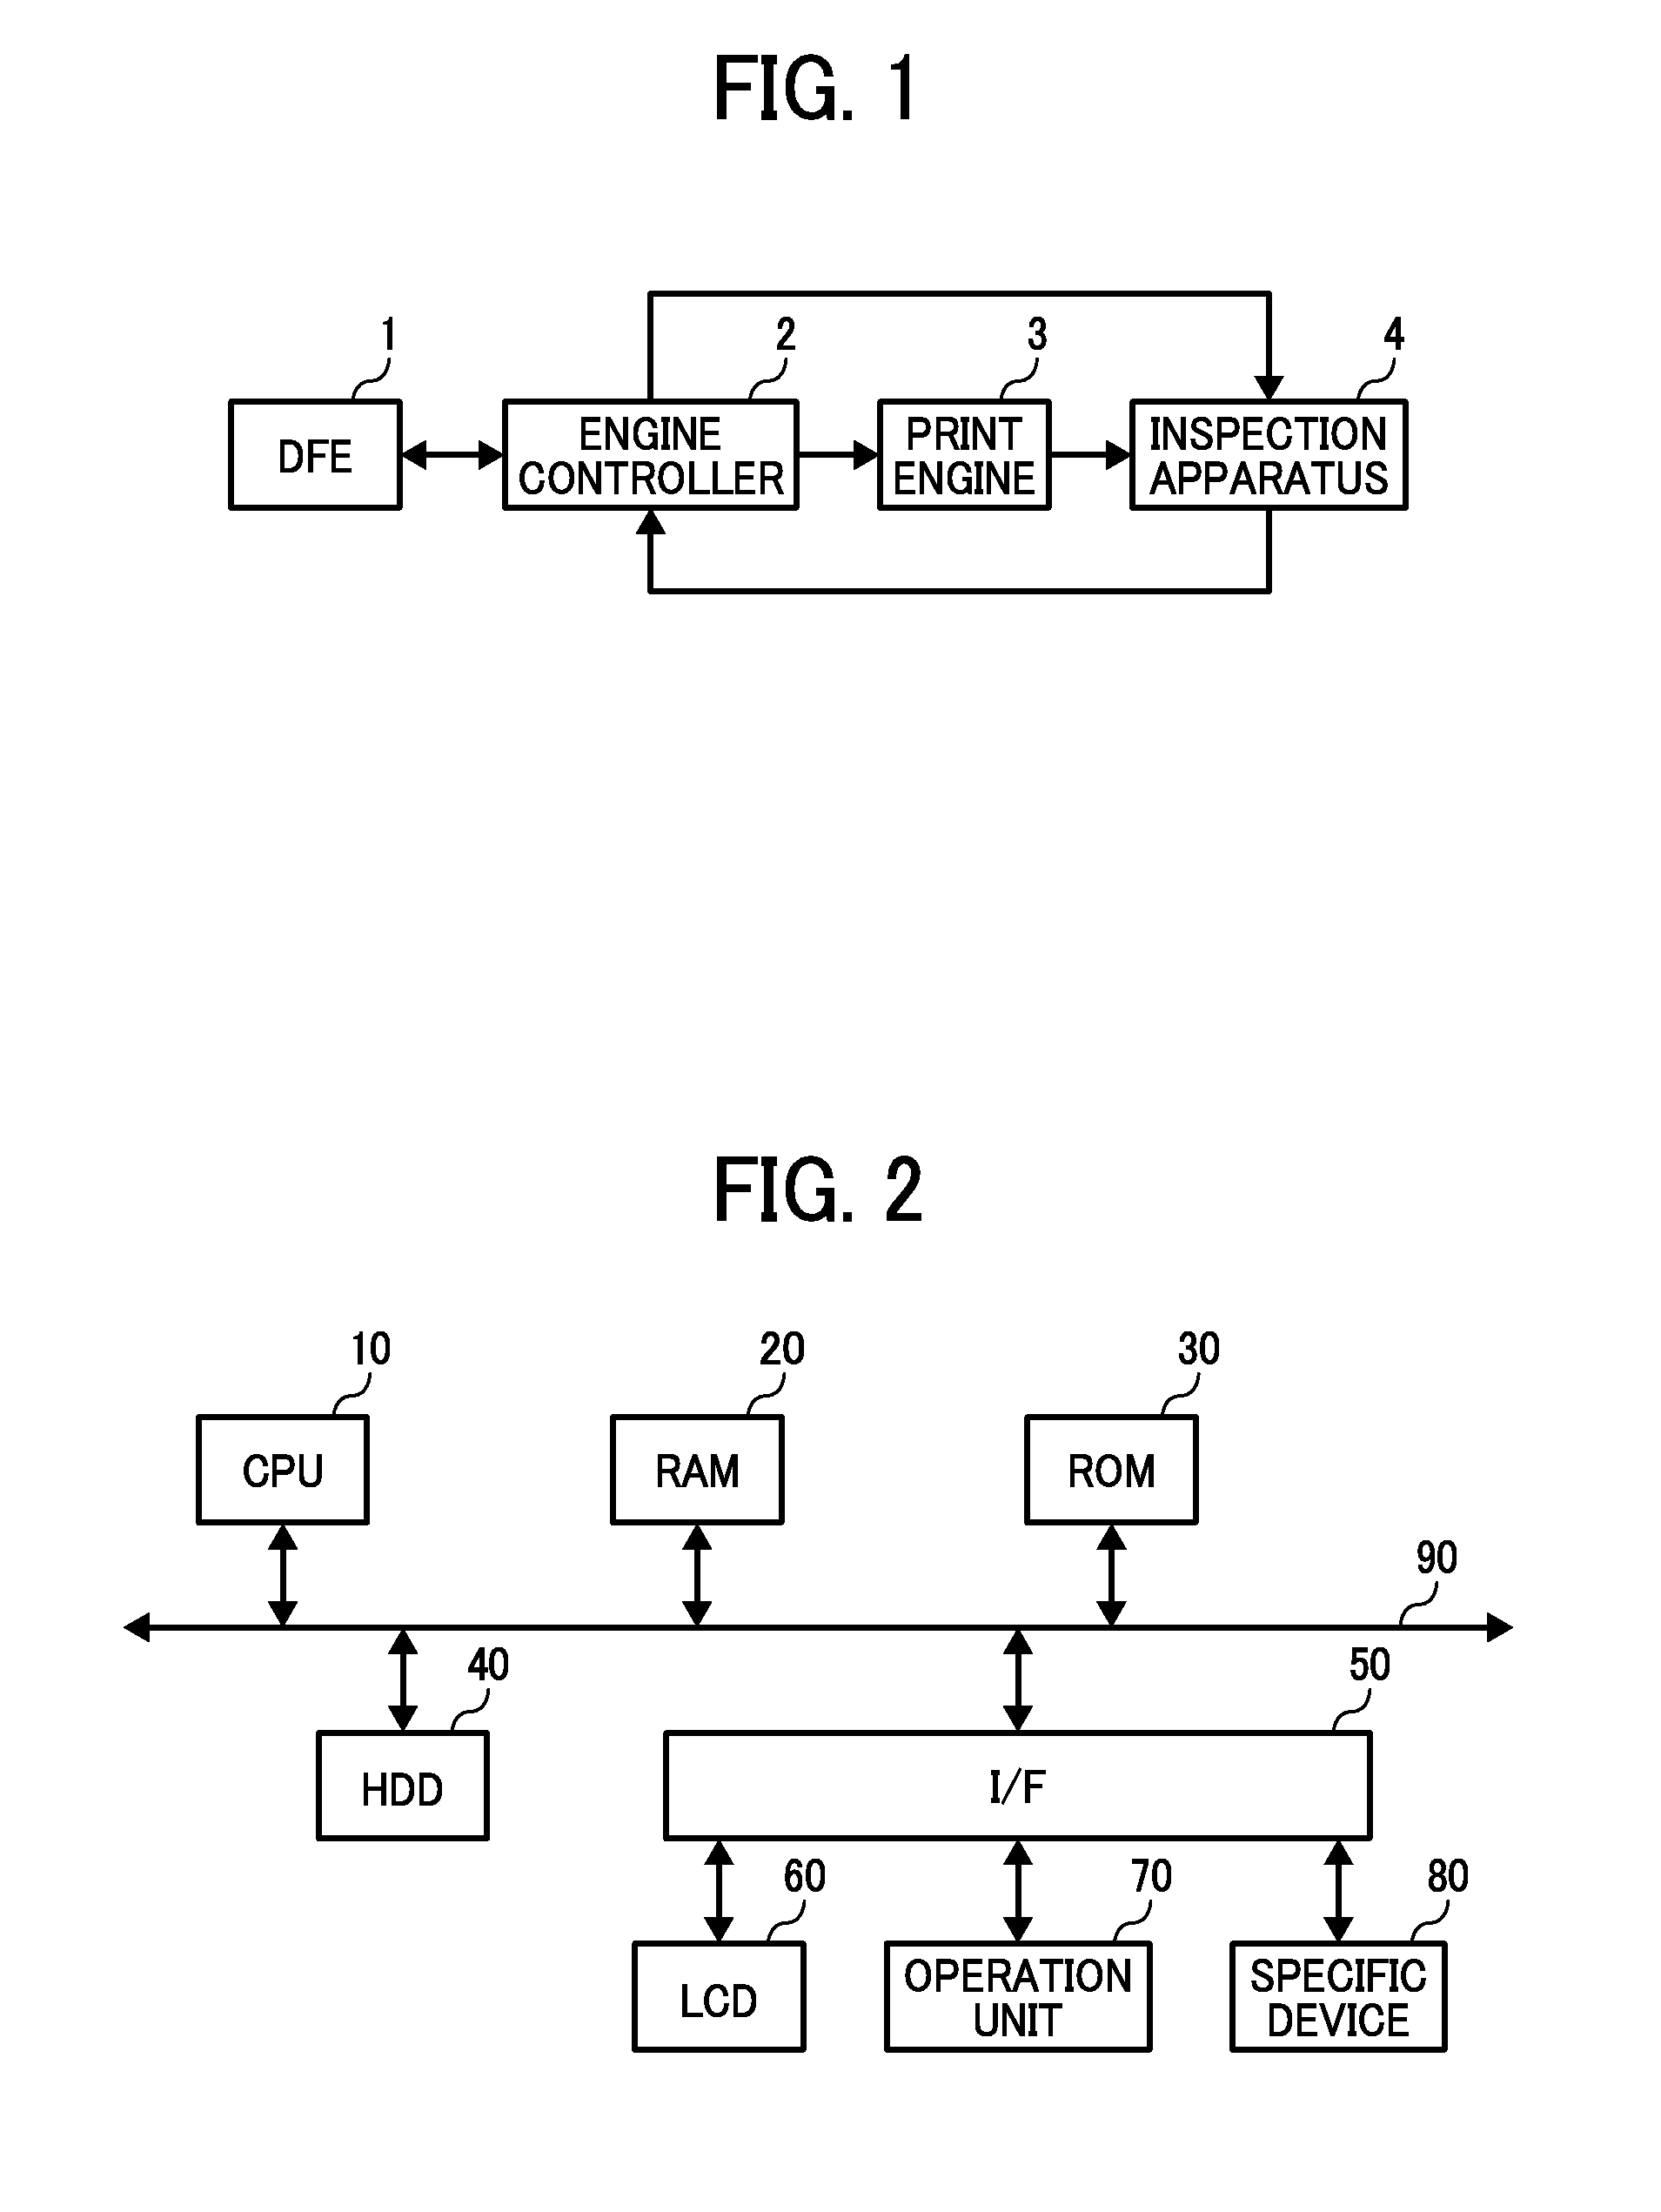 Image inspection apparatus, image inspection system and image inspection method